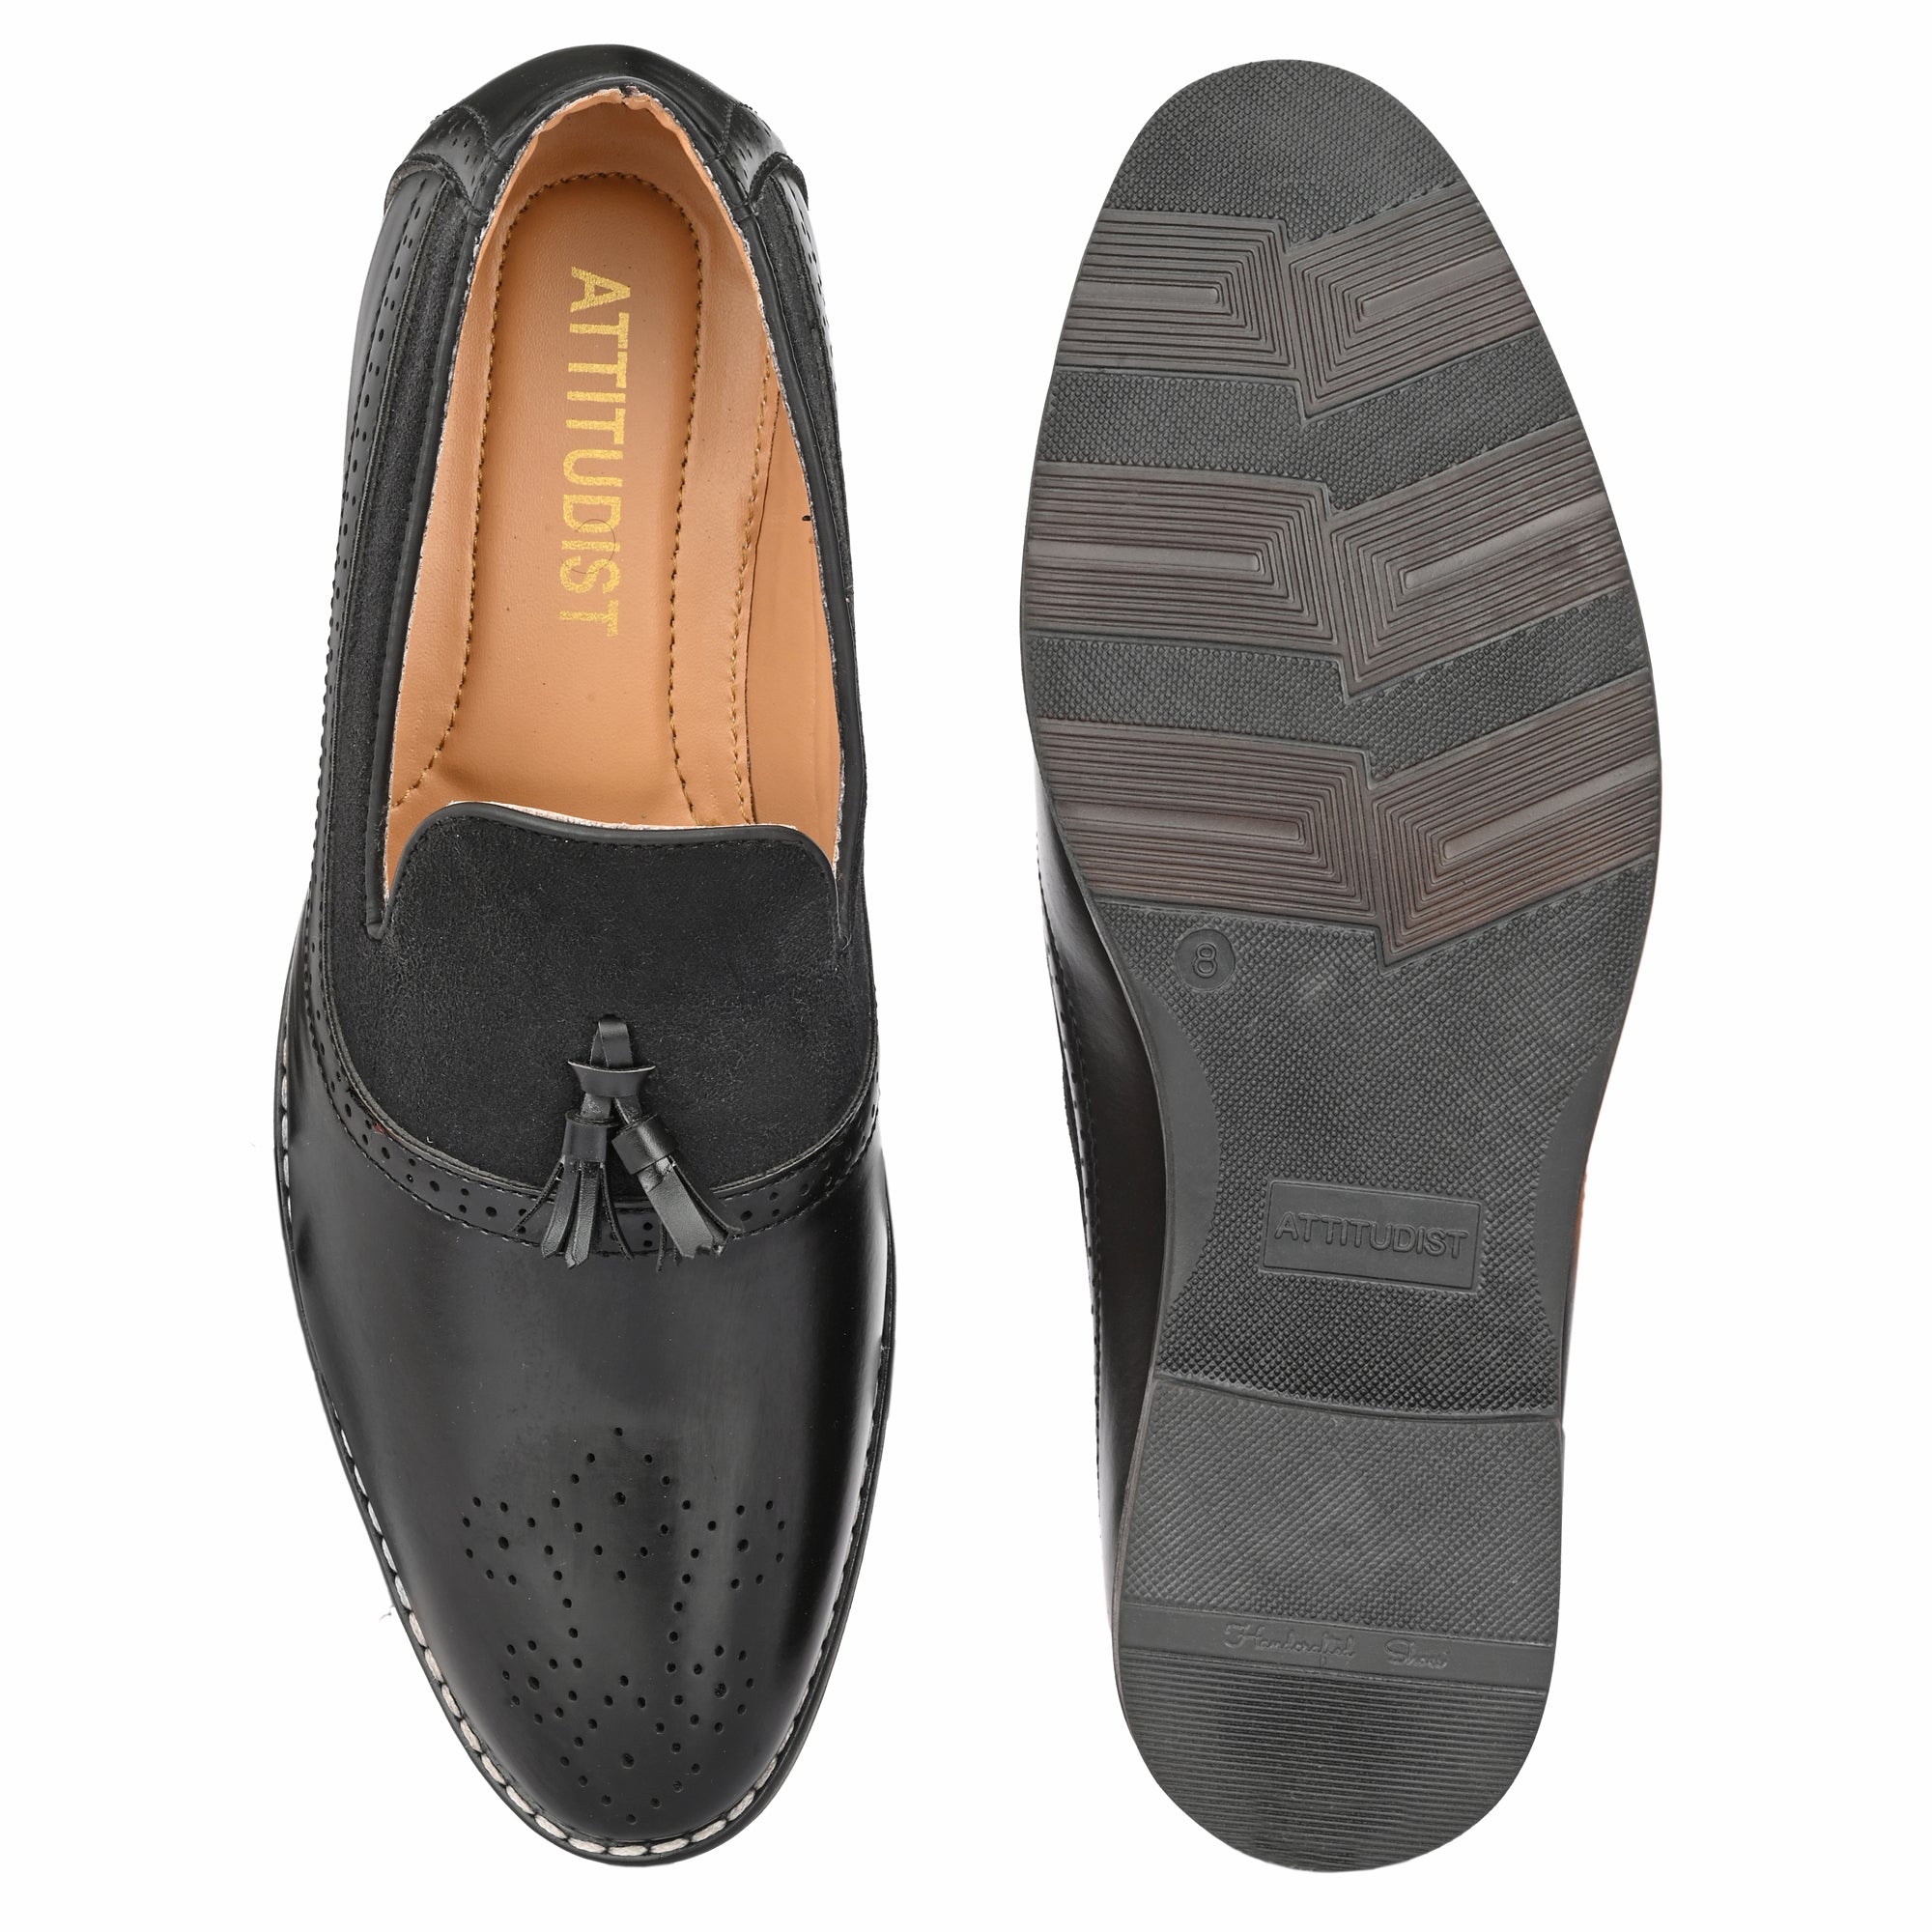 black-loafers-attitudist-shoes-for-men-with-tassel-sp3a